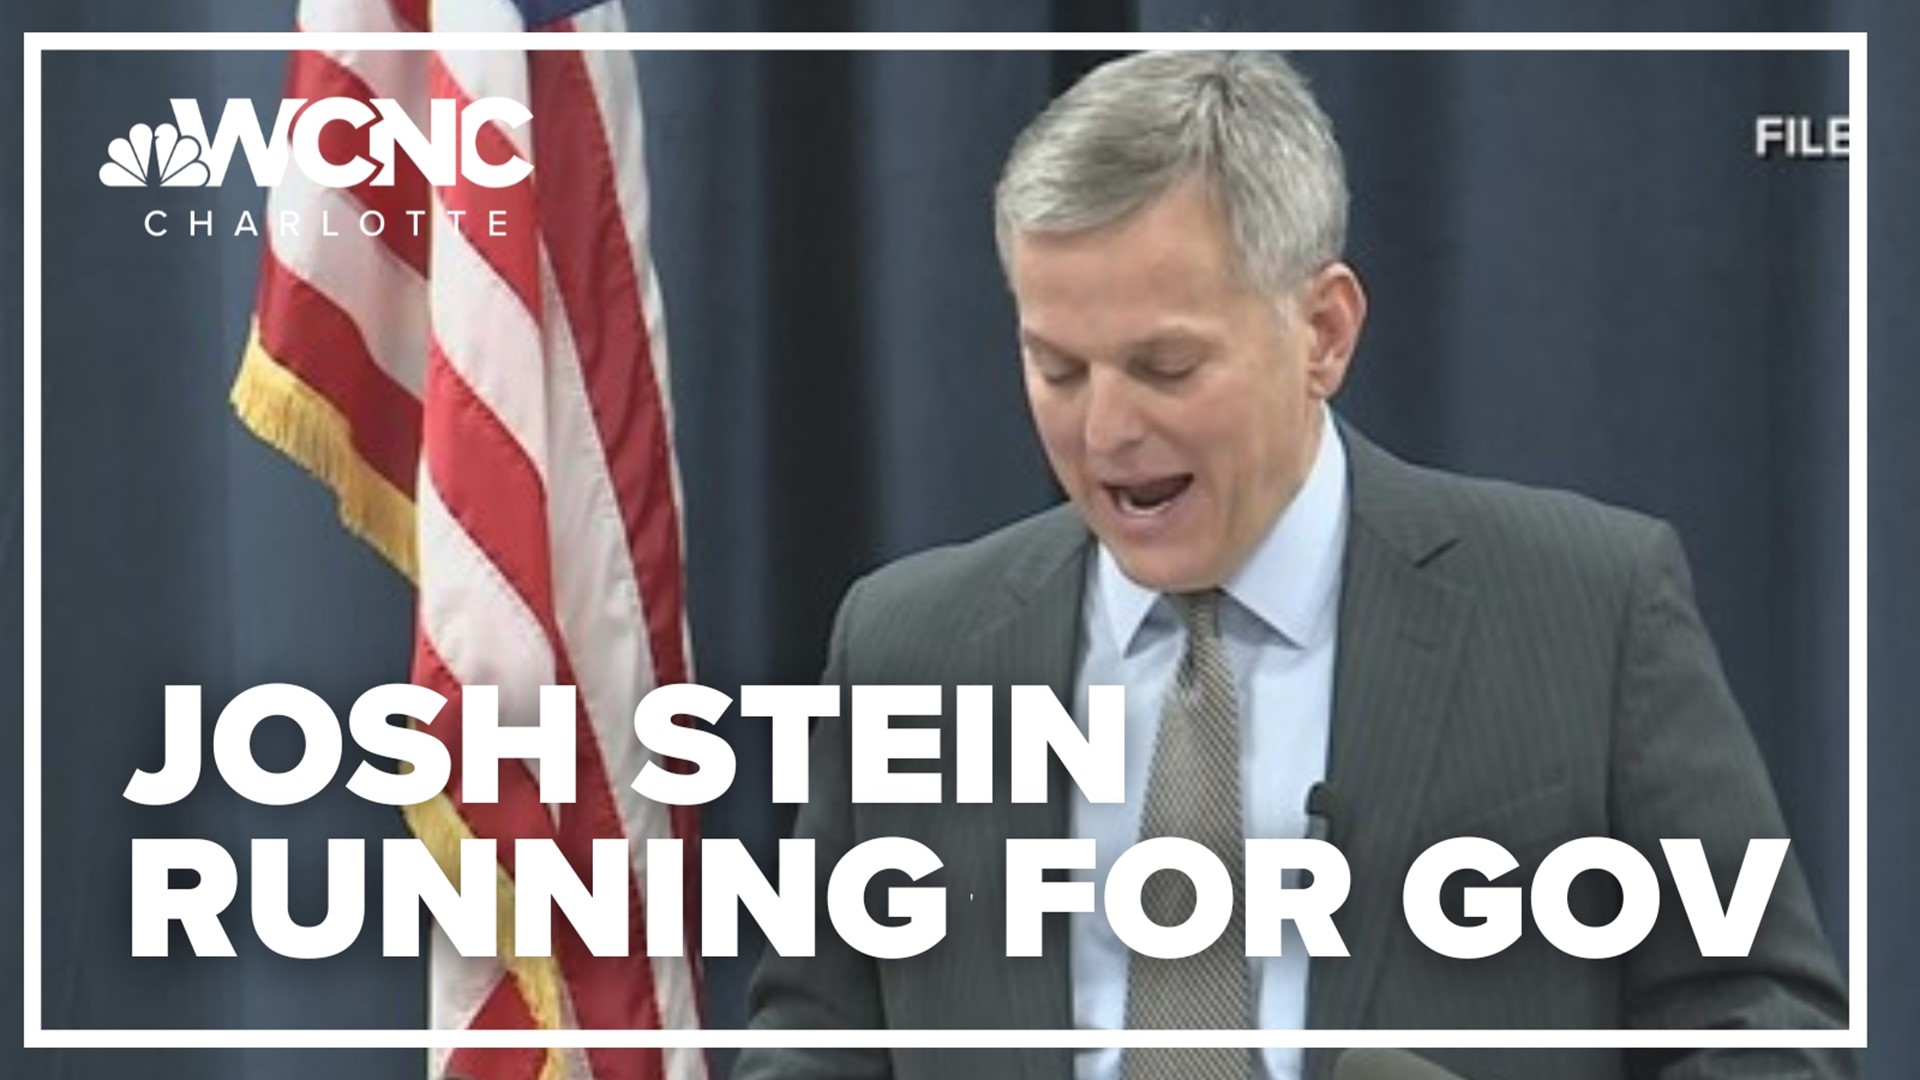 Attorney General Josh Stein announced Wednesday that he is running to serve as North Carolina's next governor in 2024.